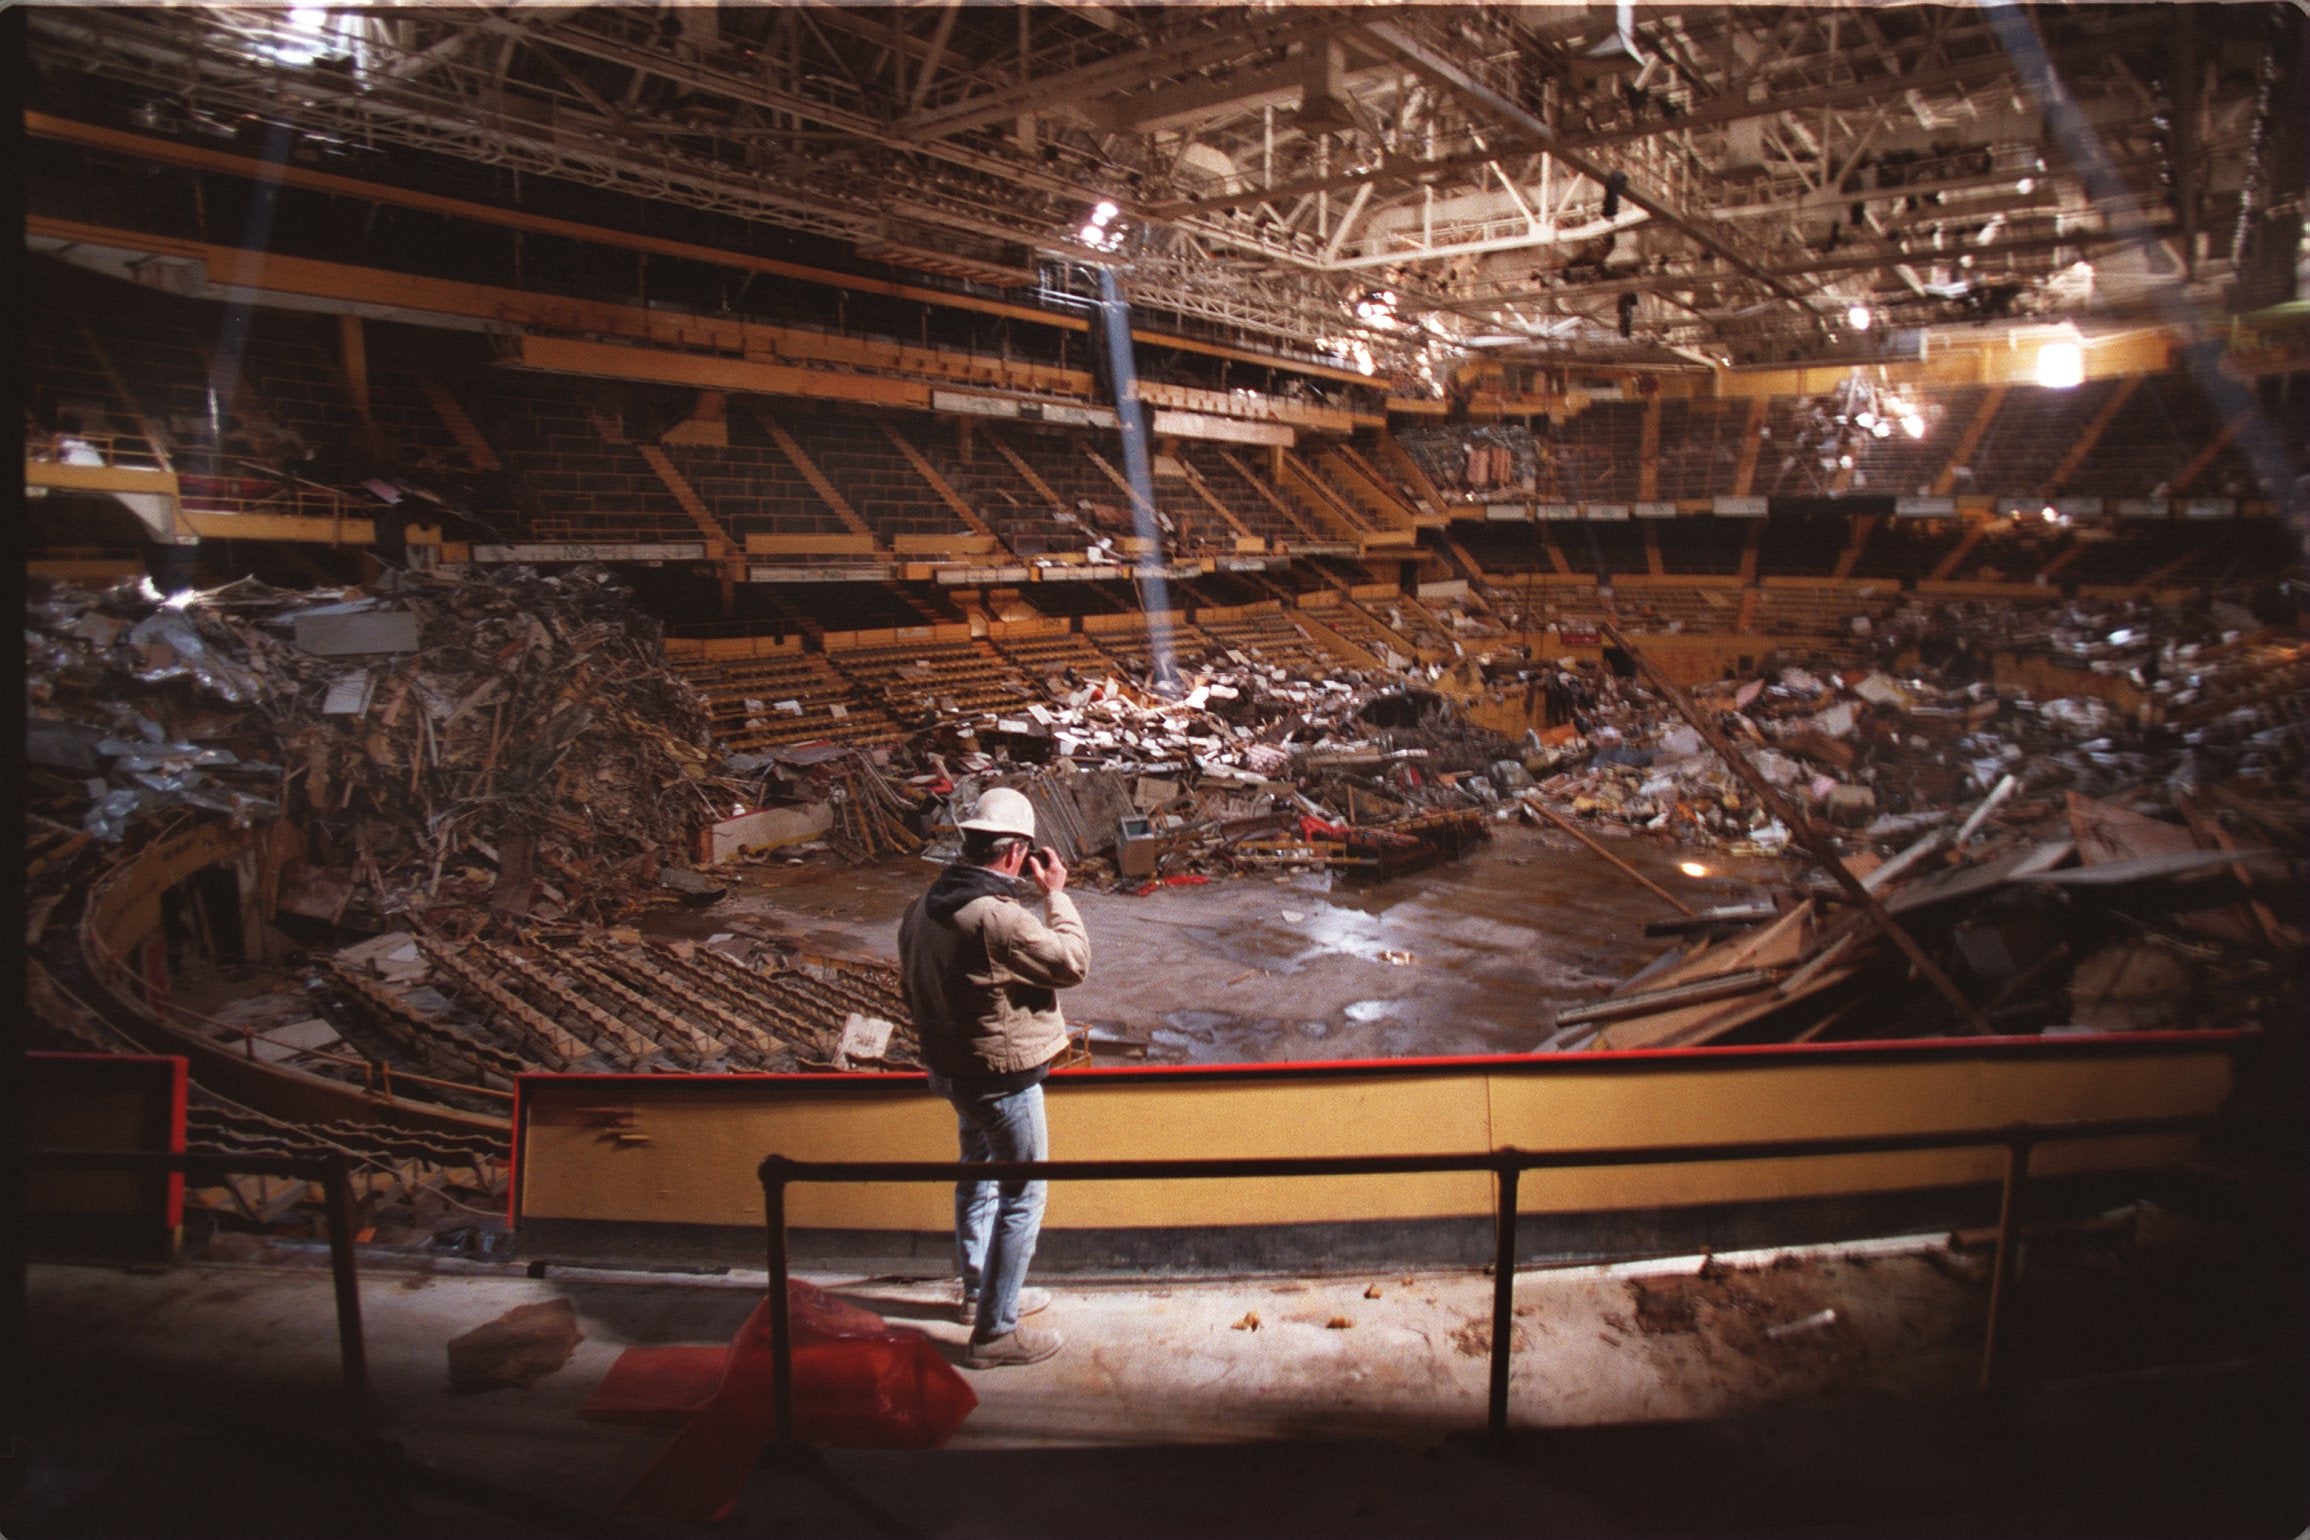 The Boston Garden closed 20 years ago today, but the mystery of the